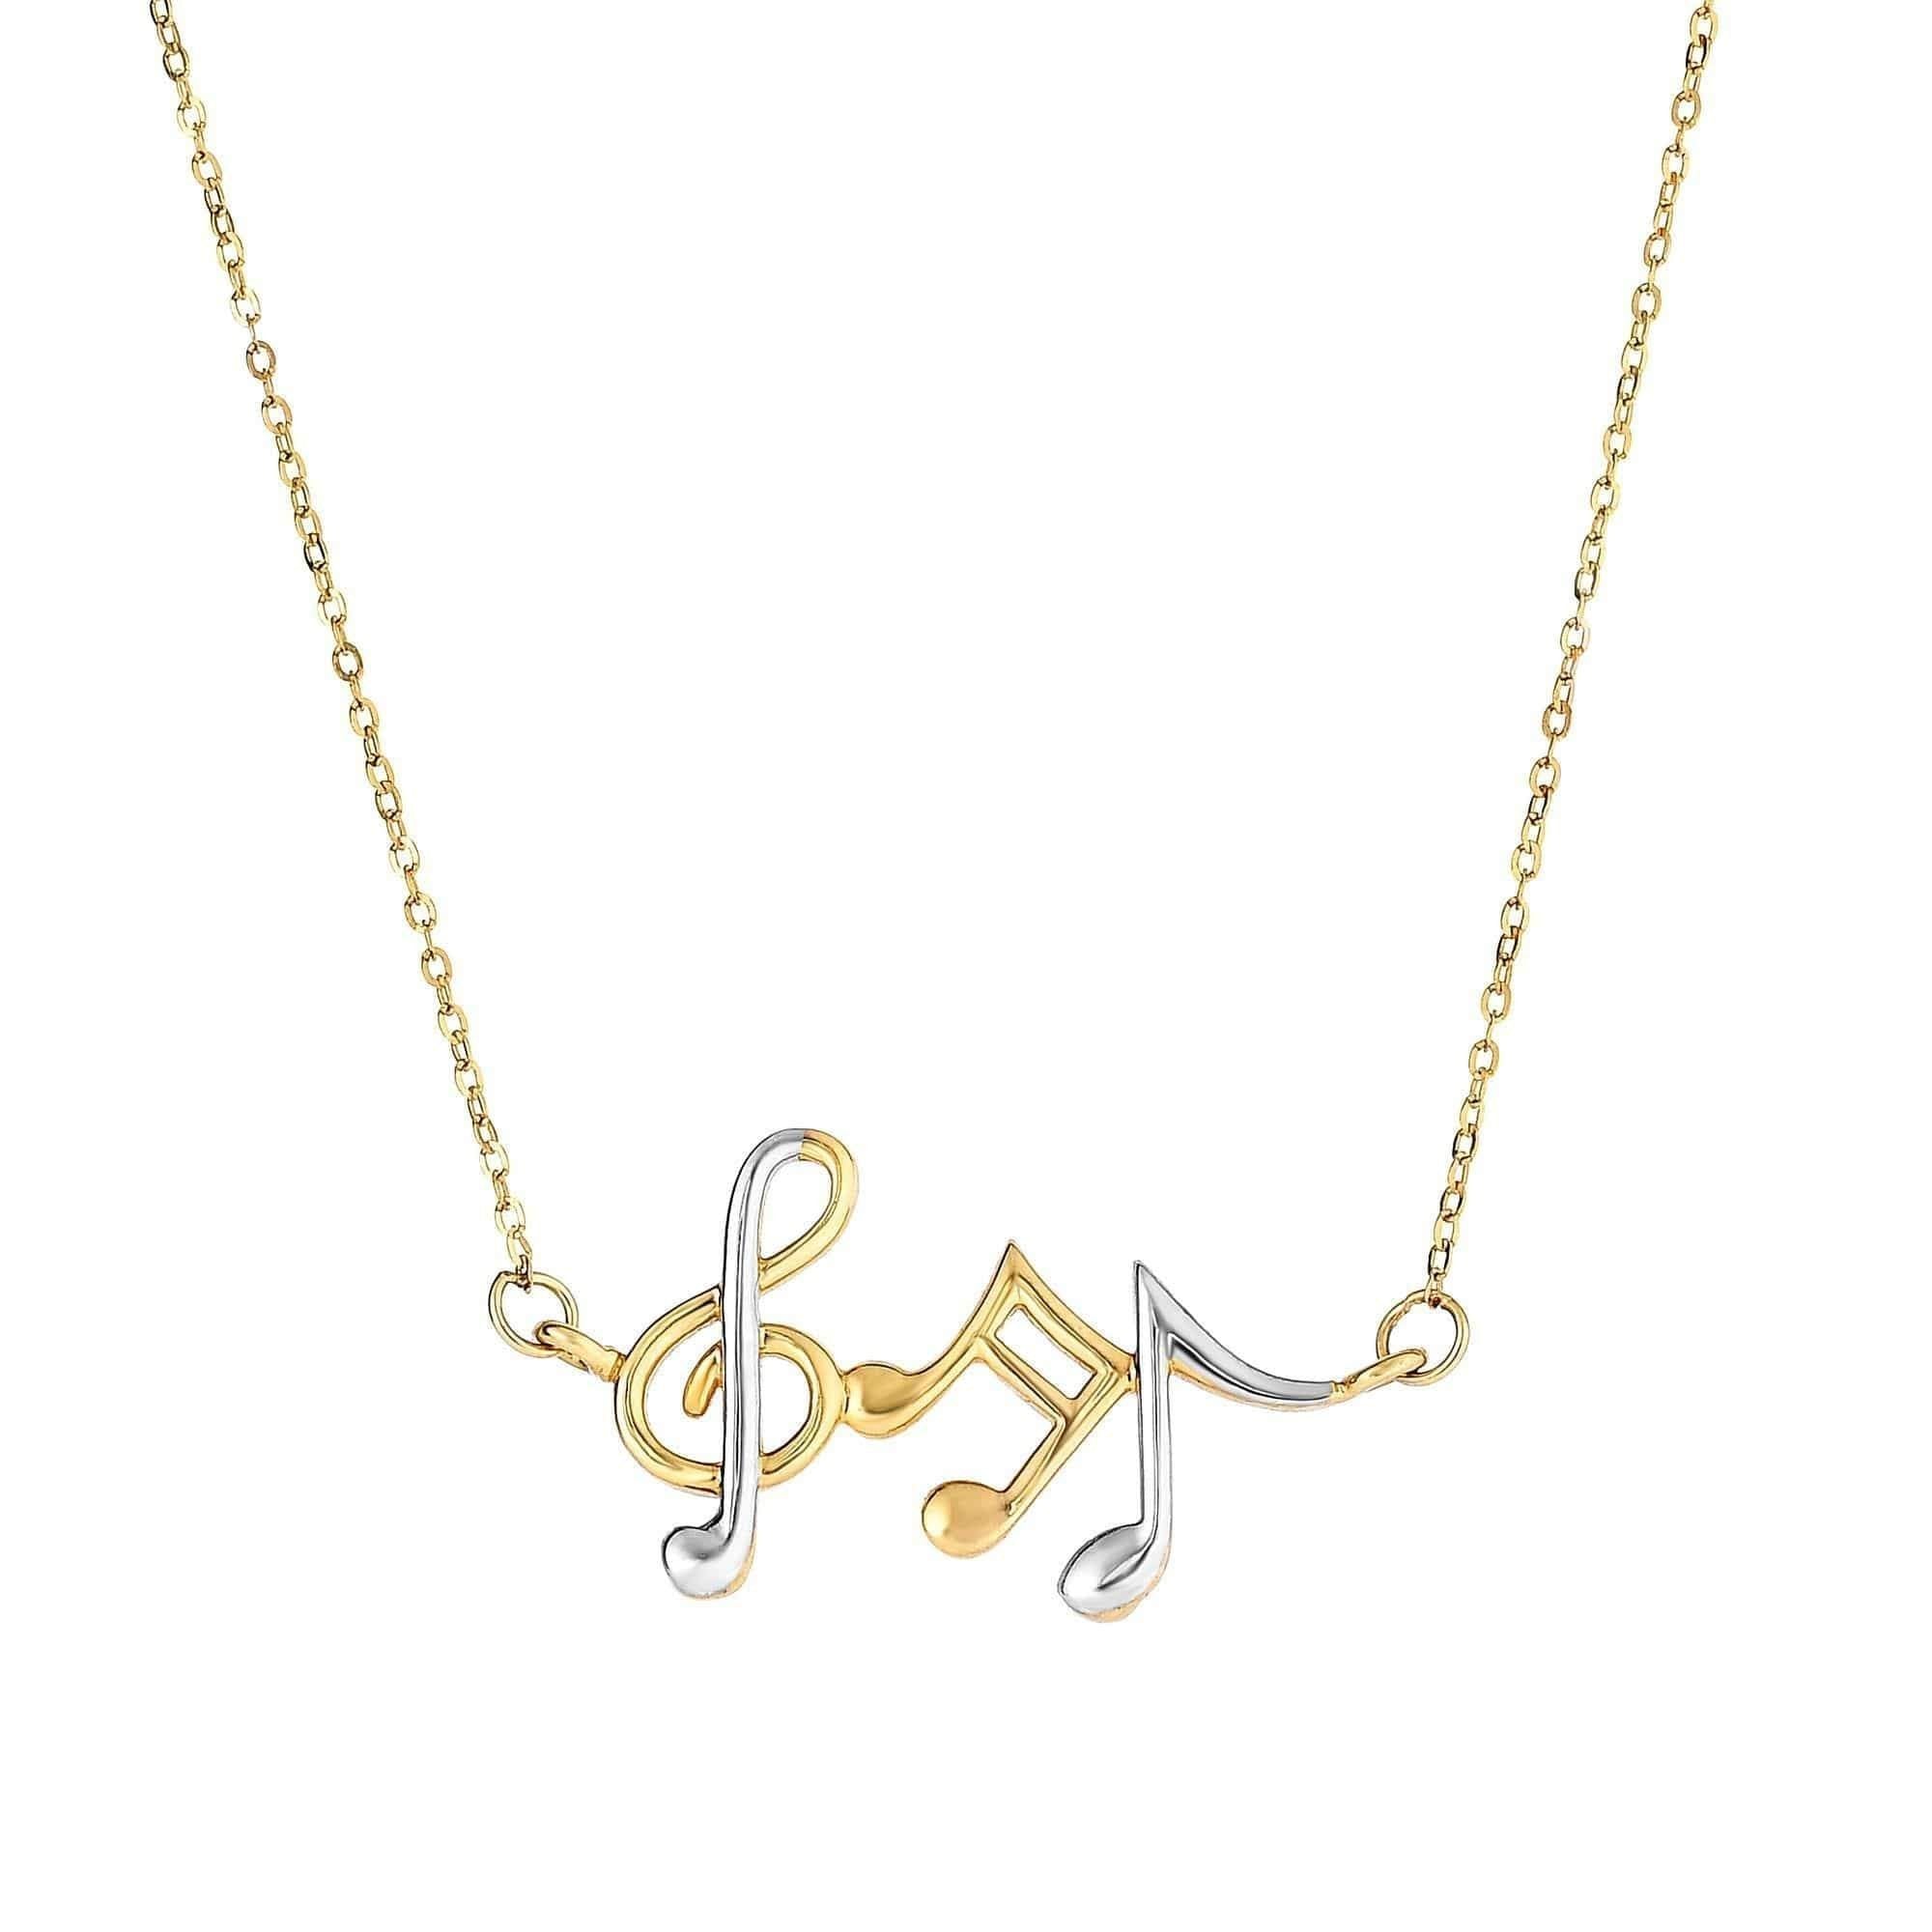 14K Gold Two Tone Music Note Pendant Necklace